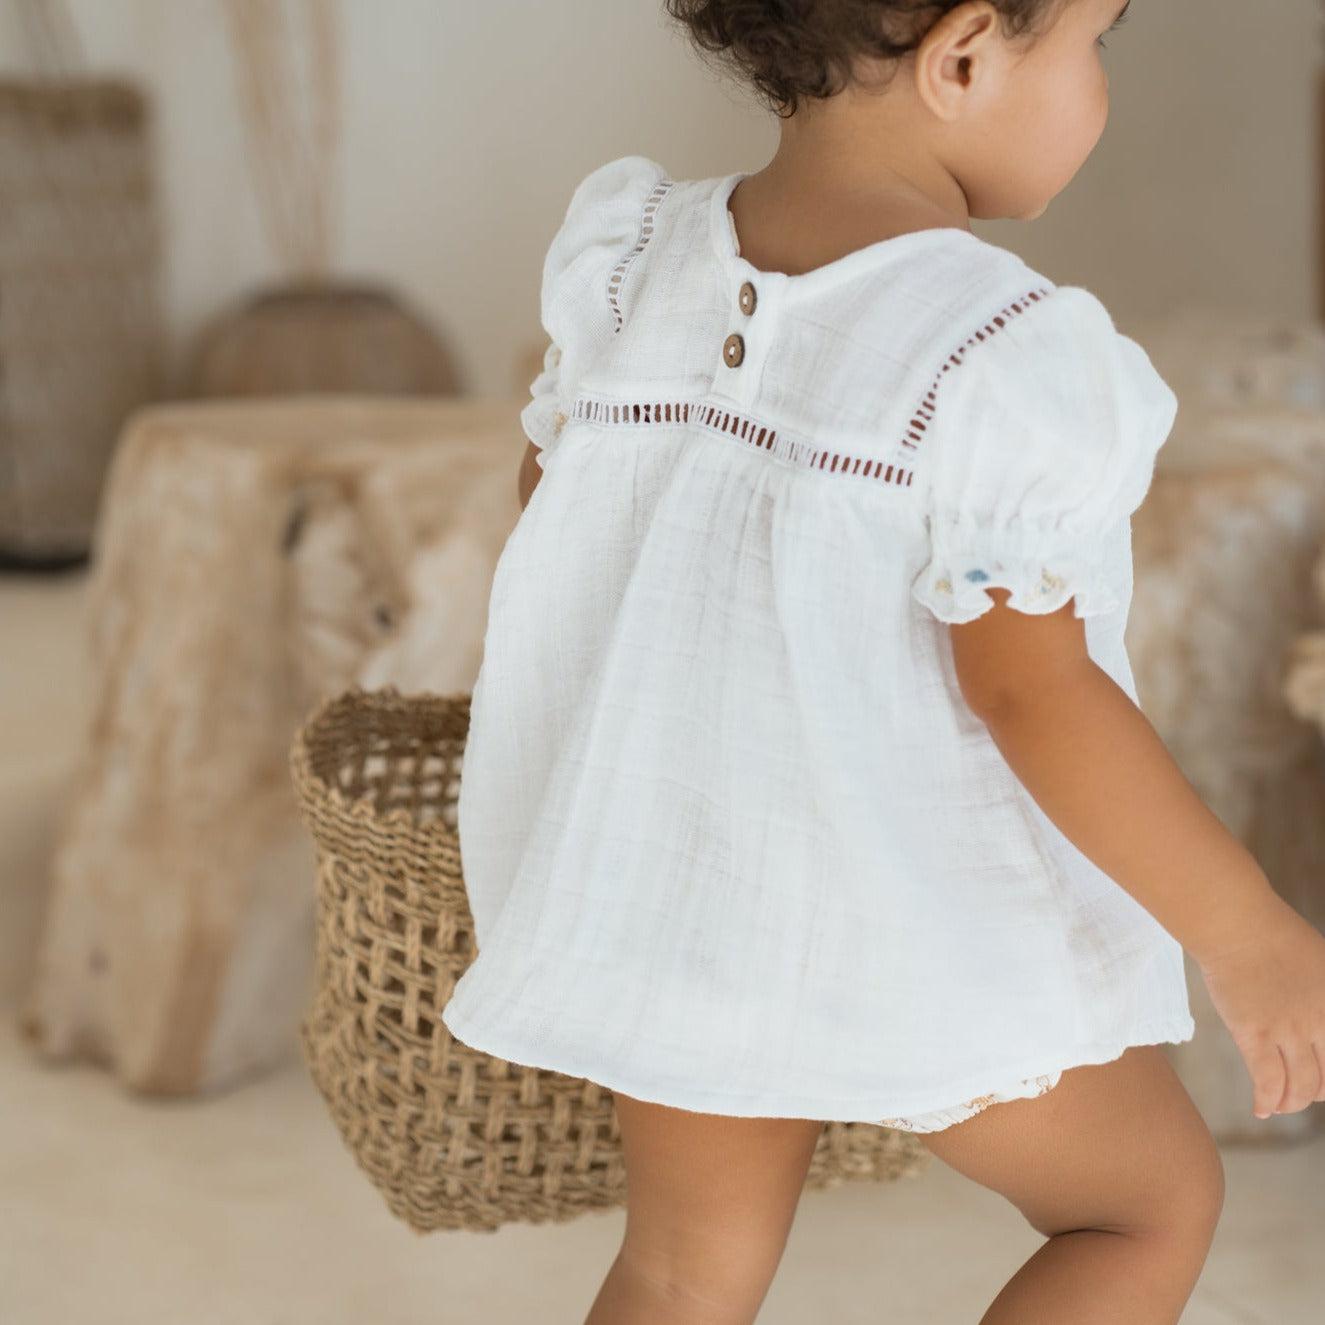 A vintage-inspired Illoura the Label baby girl in a white cotton clover blouse & bloomer set and basket.